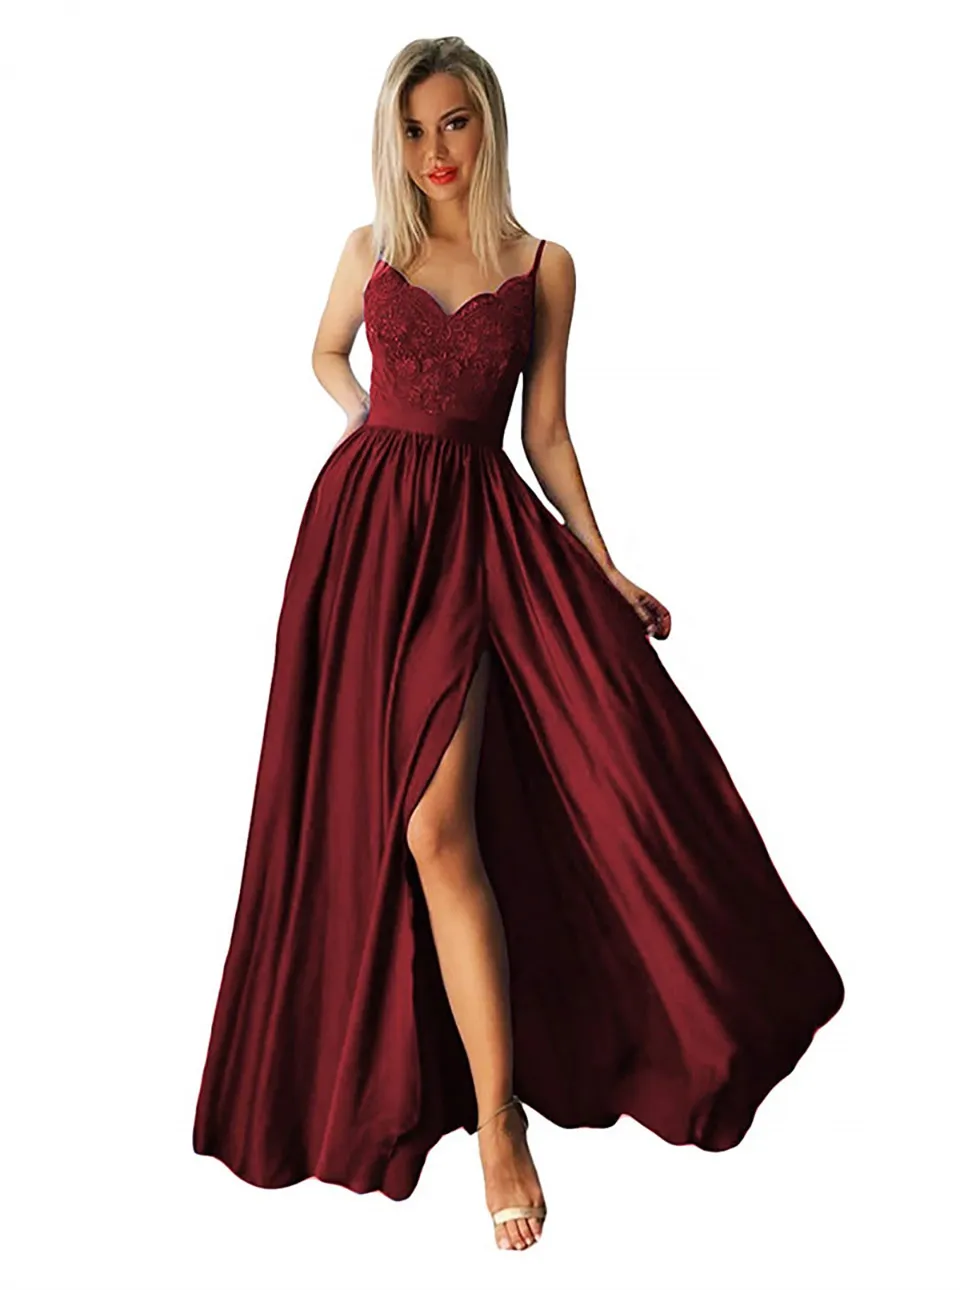 Deep red Bridesmaid Dresses Long Lace Appliques Beaded High Split Floor Length Wedding Guest Gowns Maid Of Honor Dress